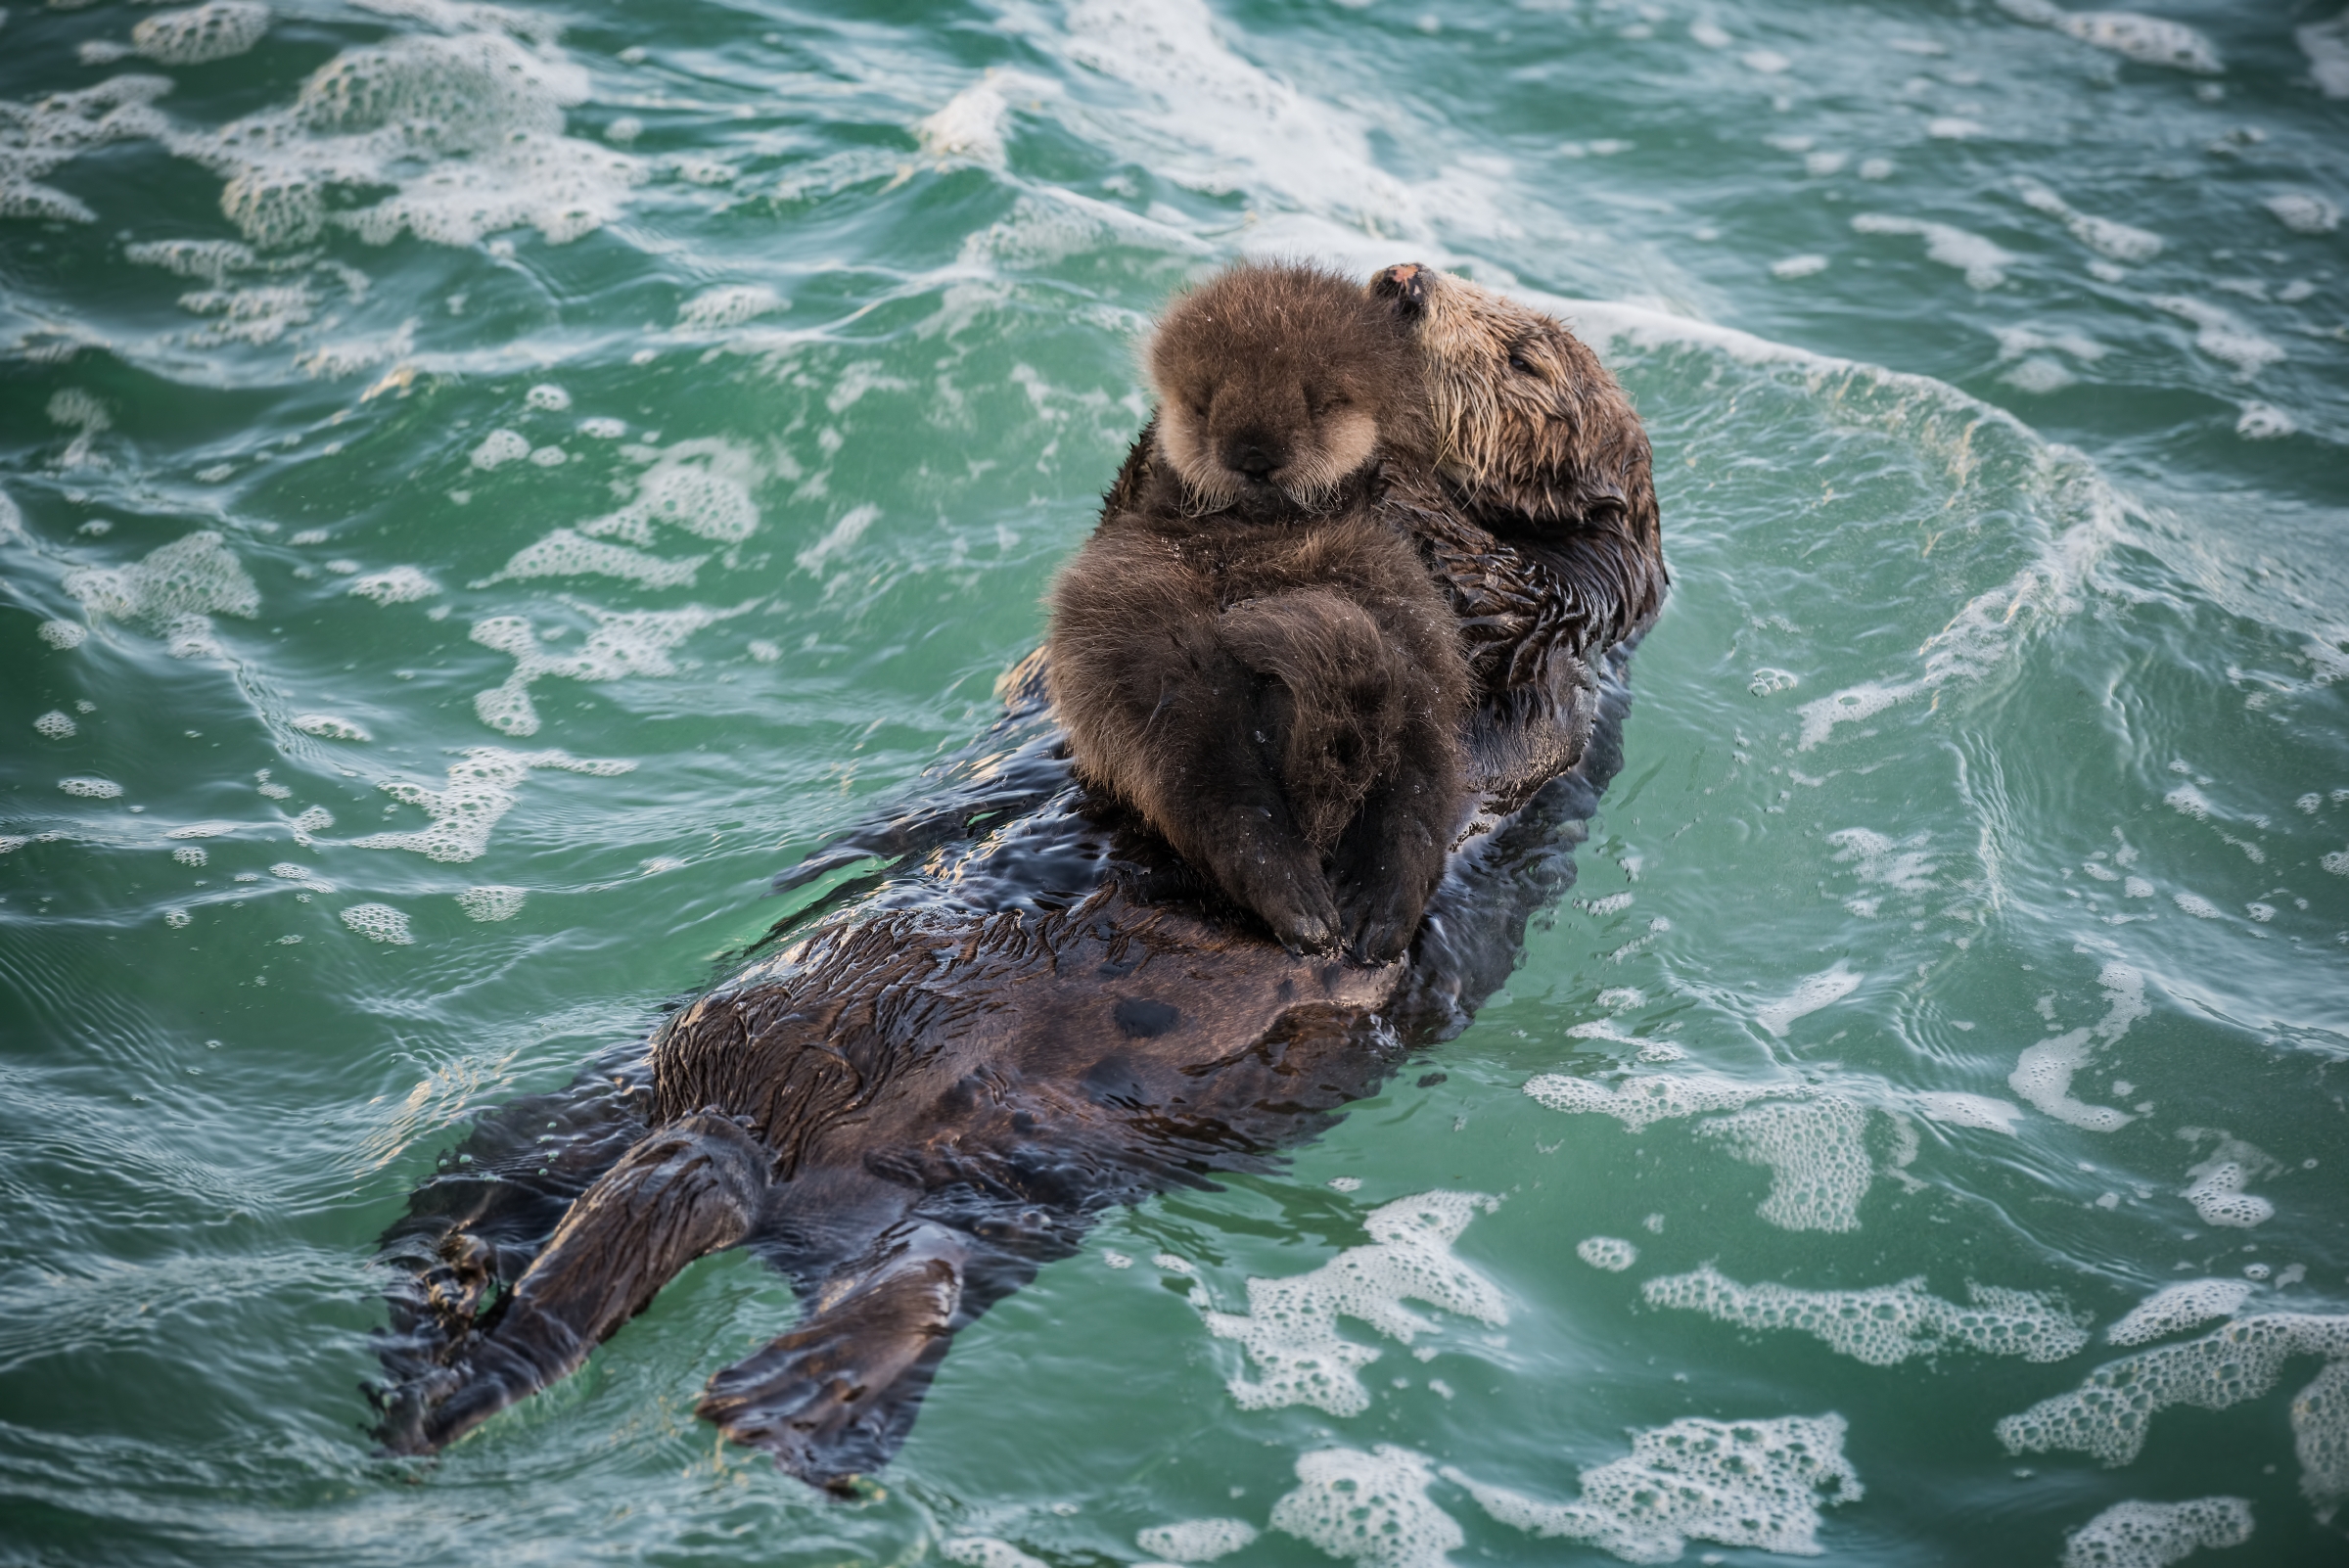 PHOTO:  A sea otter mother is pictured here with her newborn pup in the Great Tide Pool at the Monterey Bay Aquarium in Monterey, Calif.